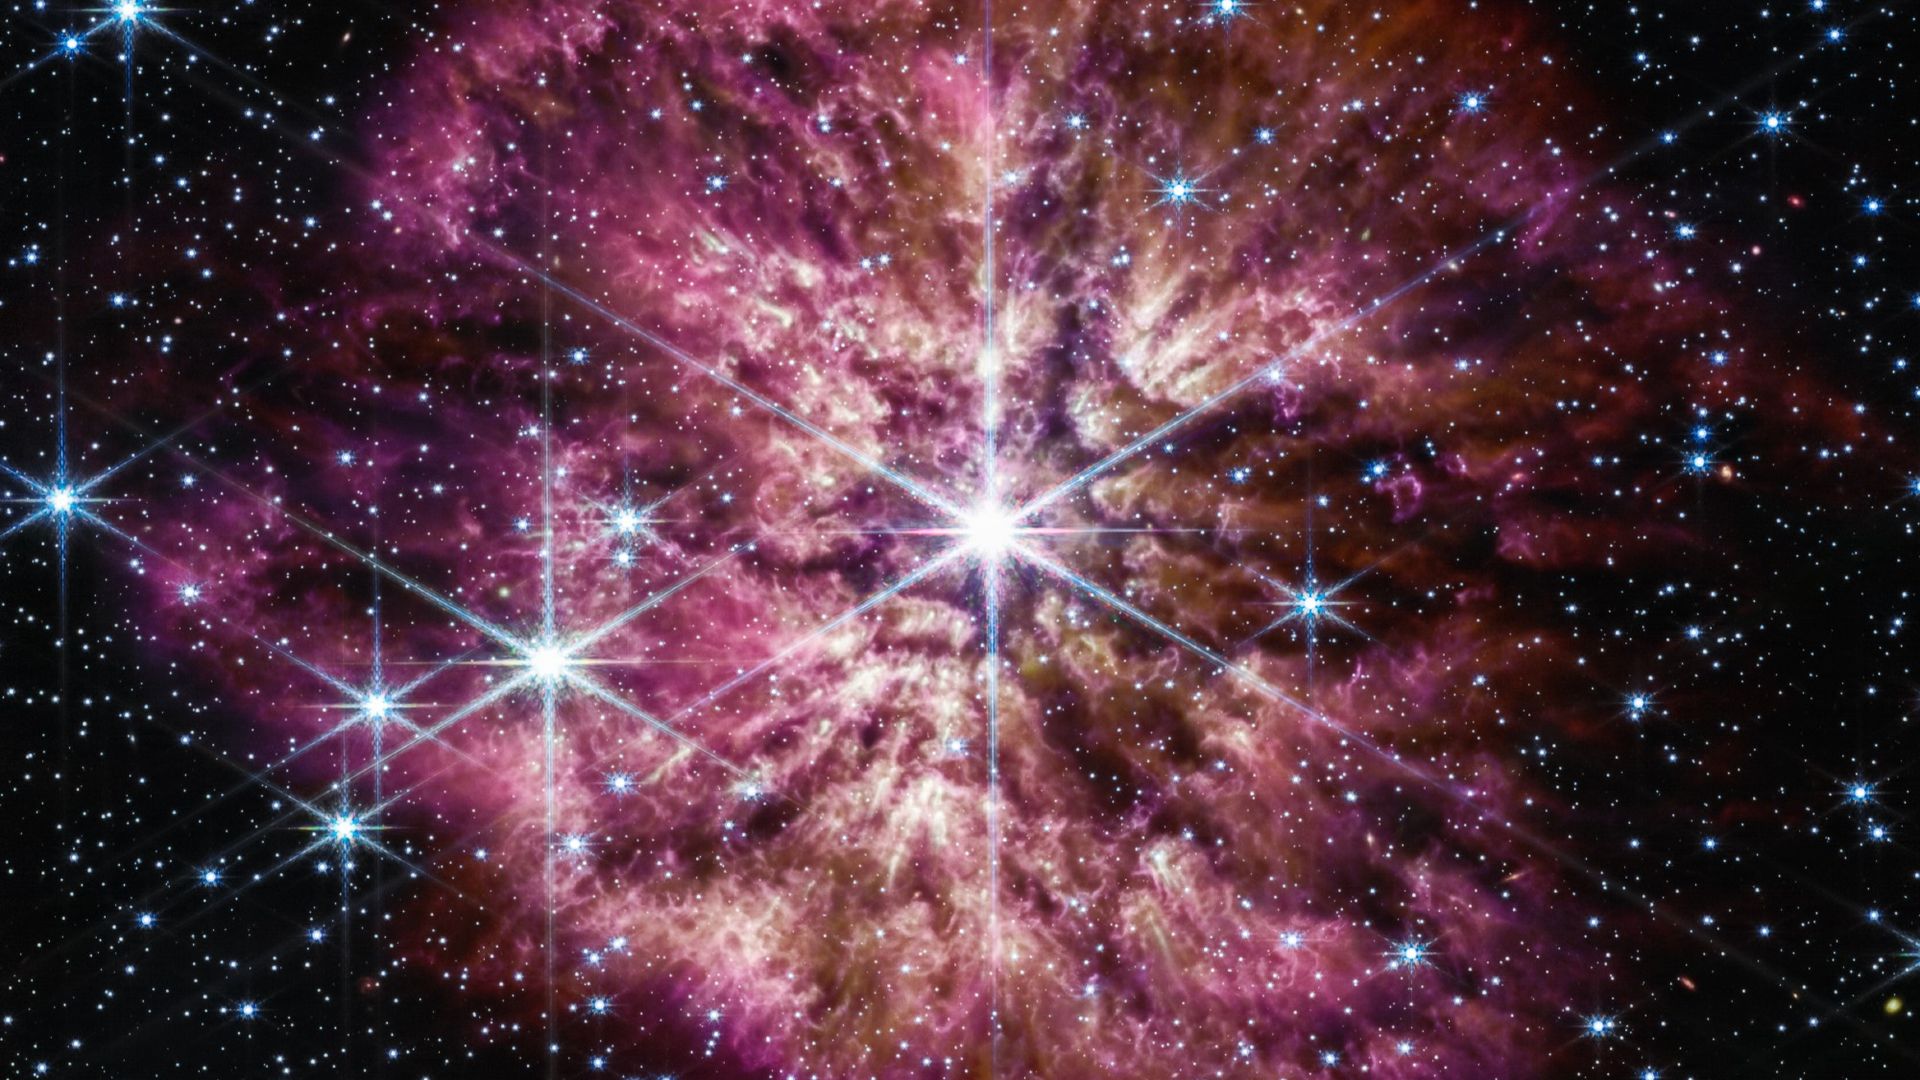 A star surrounded by gas glowing in red and pink